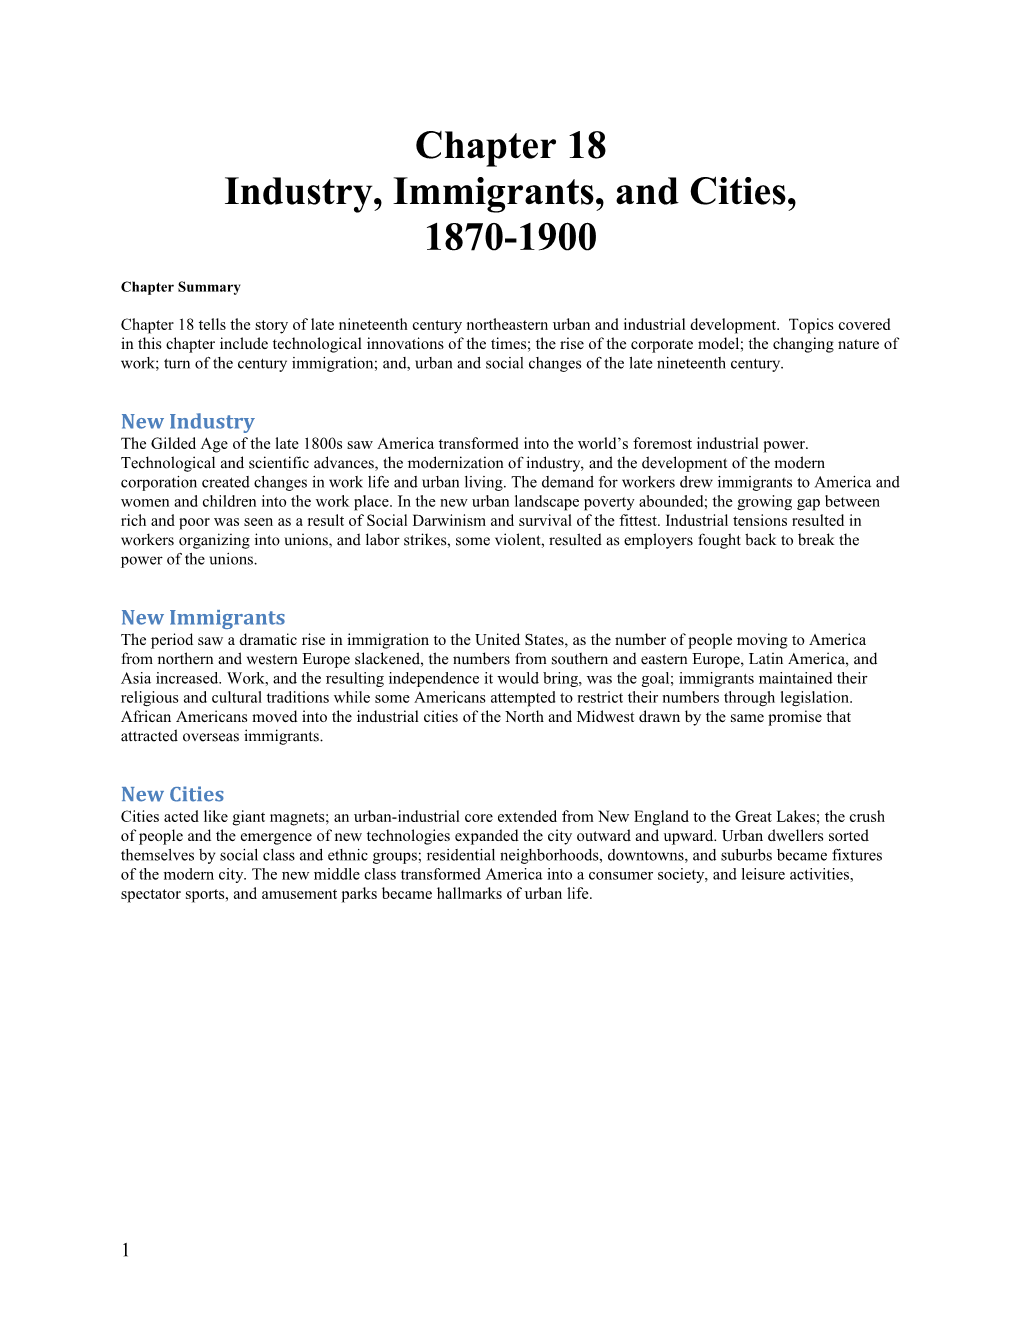 Industry, Immigrants, and Cities